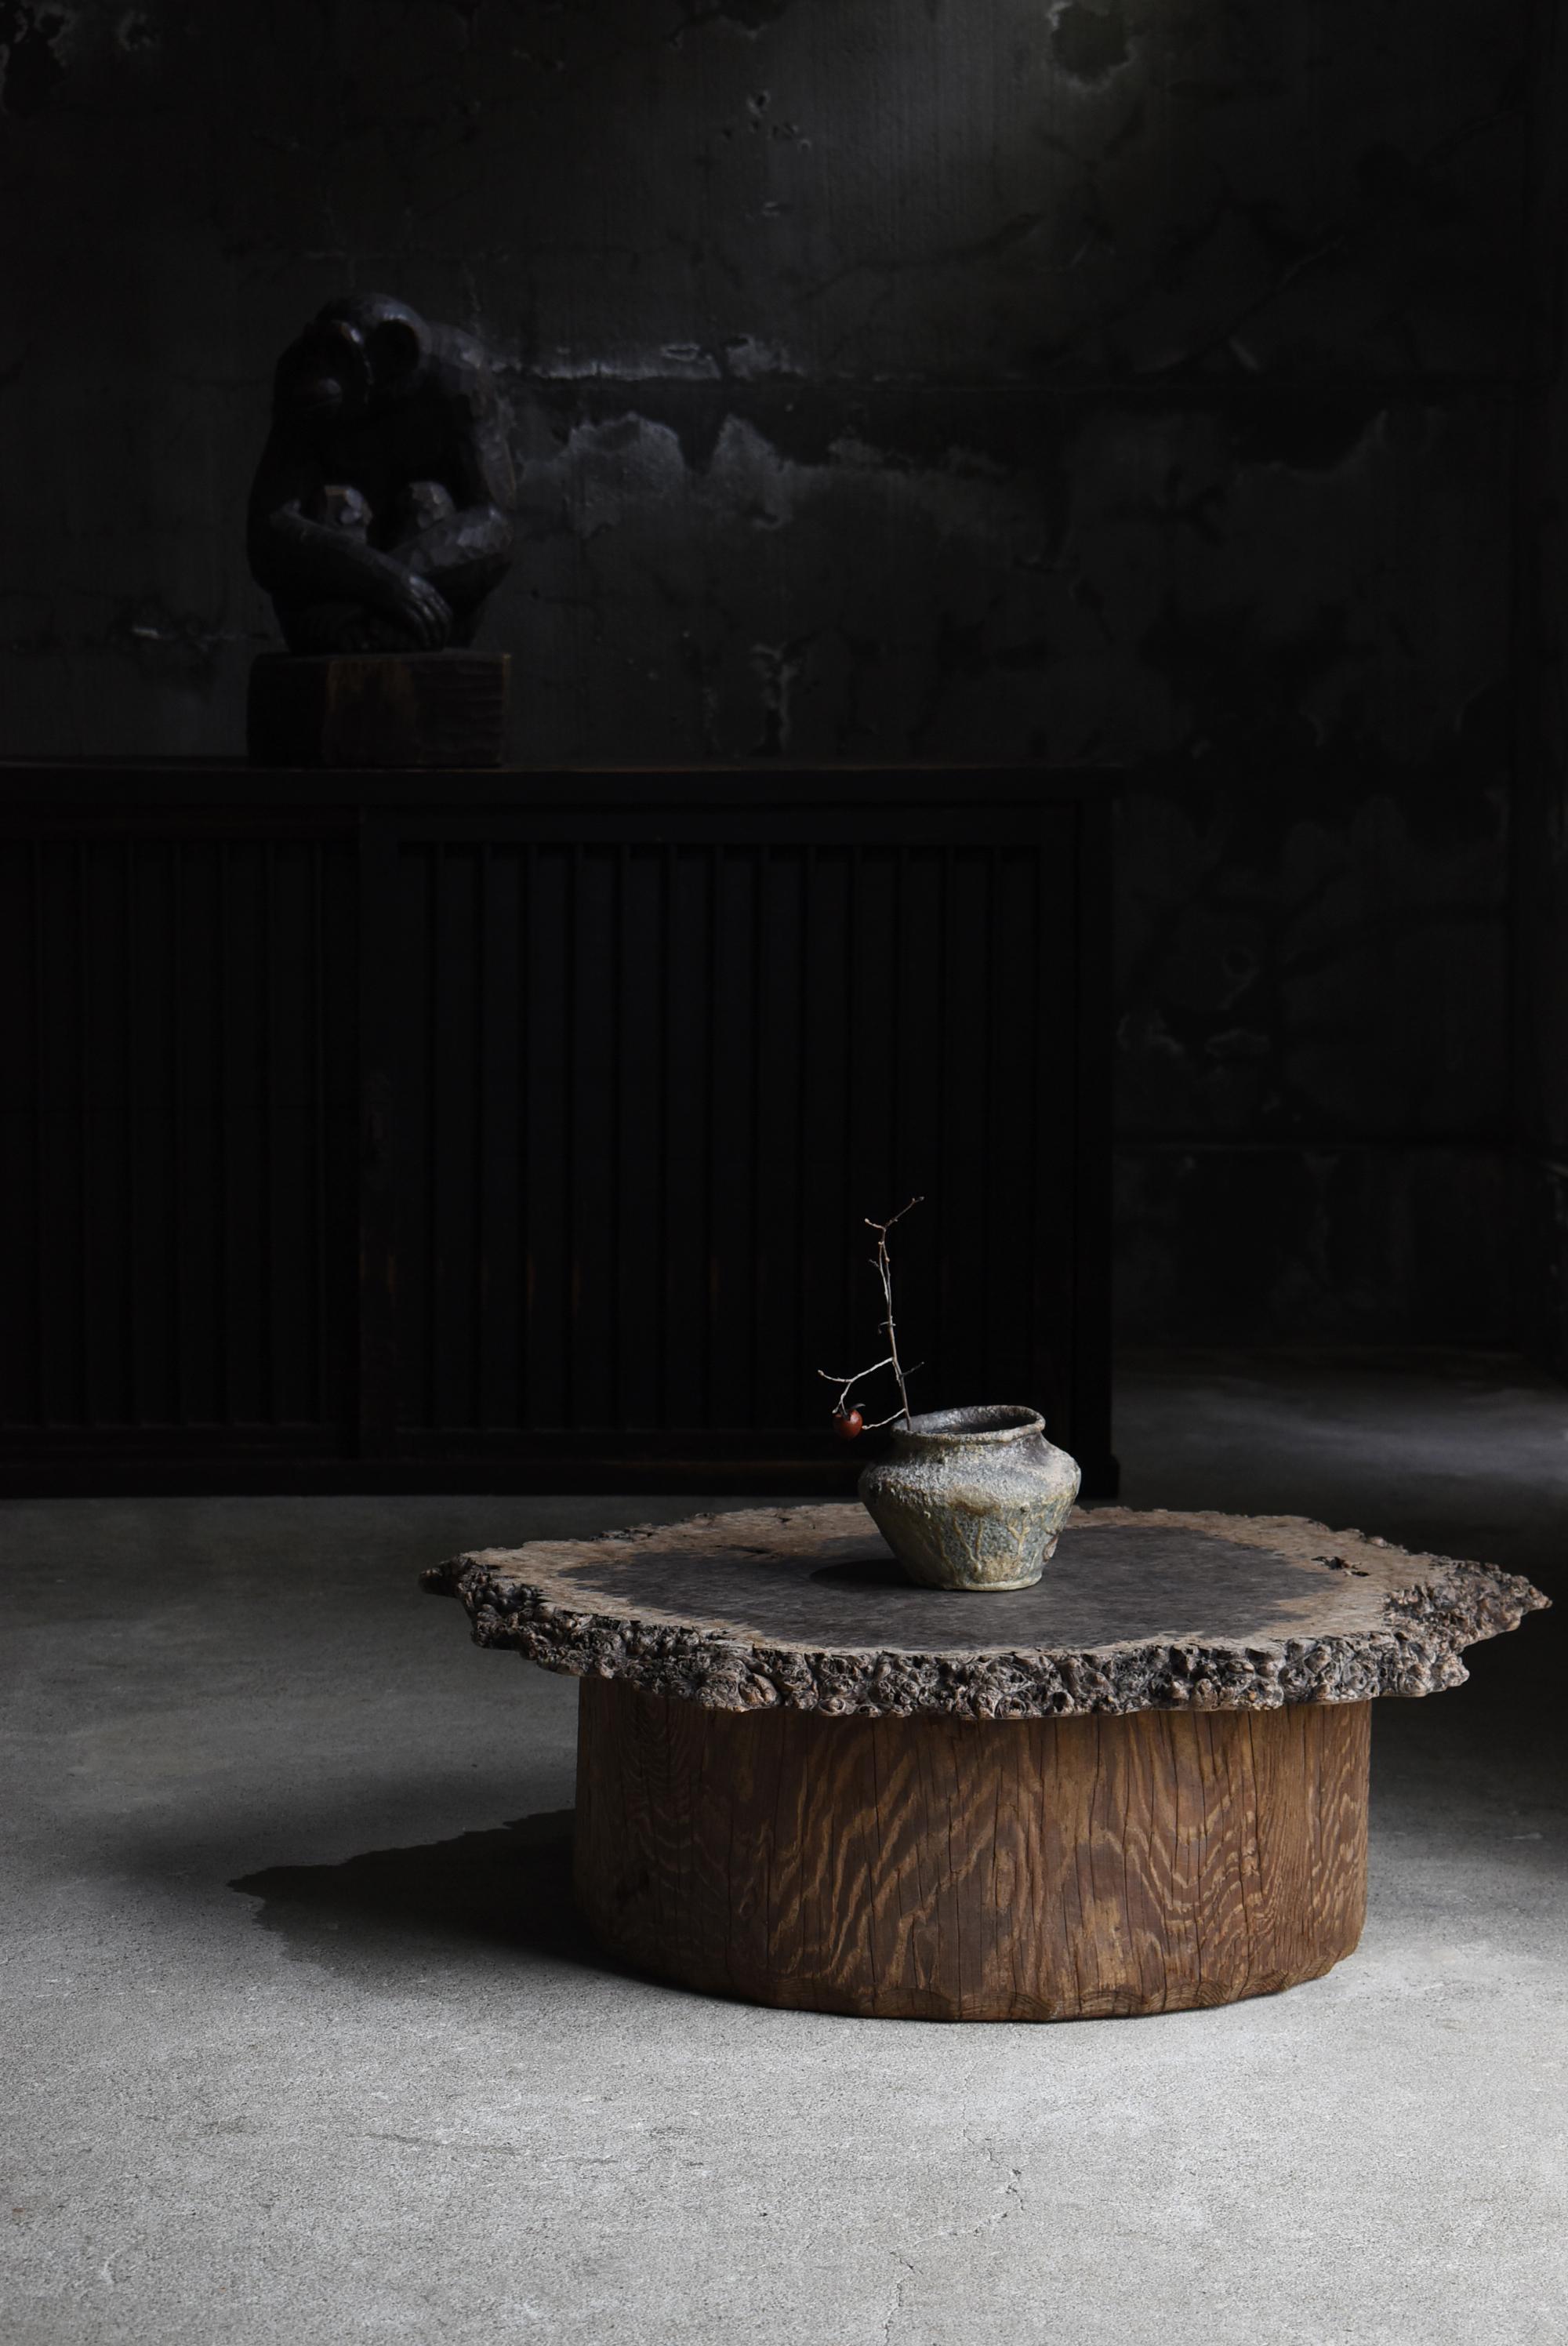 Very old low table made in Japan.
Simple design with a single board on a stump.
The furniture is from the Meiji period (1860s-1900s).

The stump is cedar wood.
The material of the top is unknown, but it is a valuable single piece of wood with very